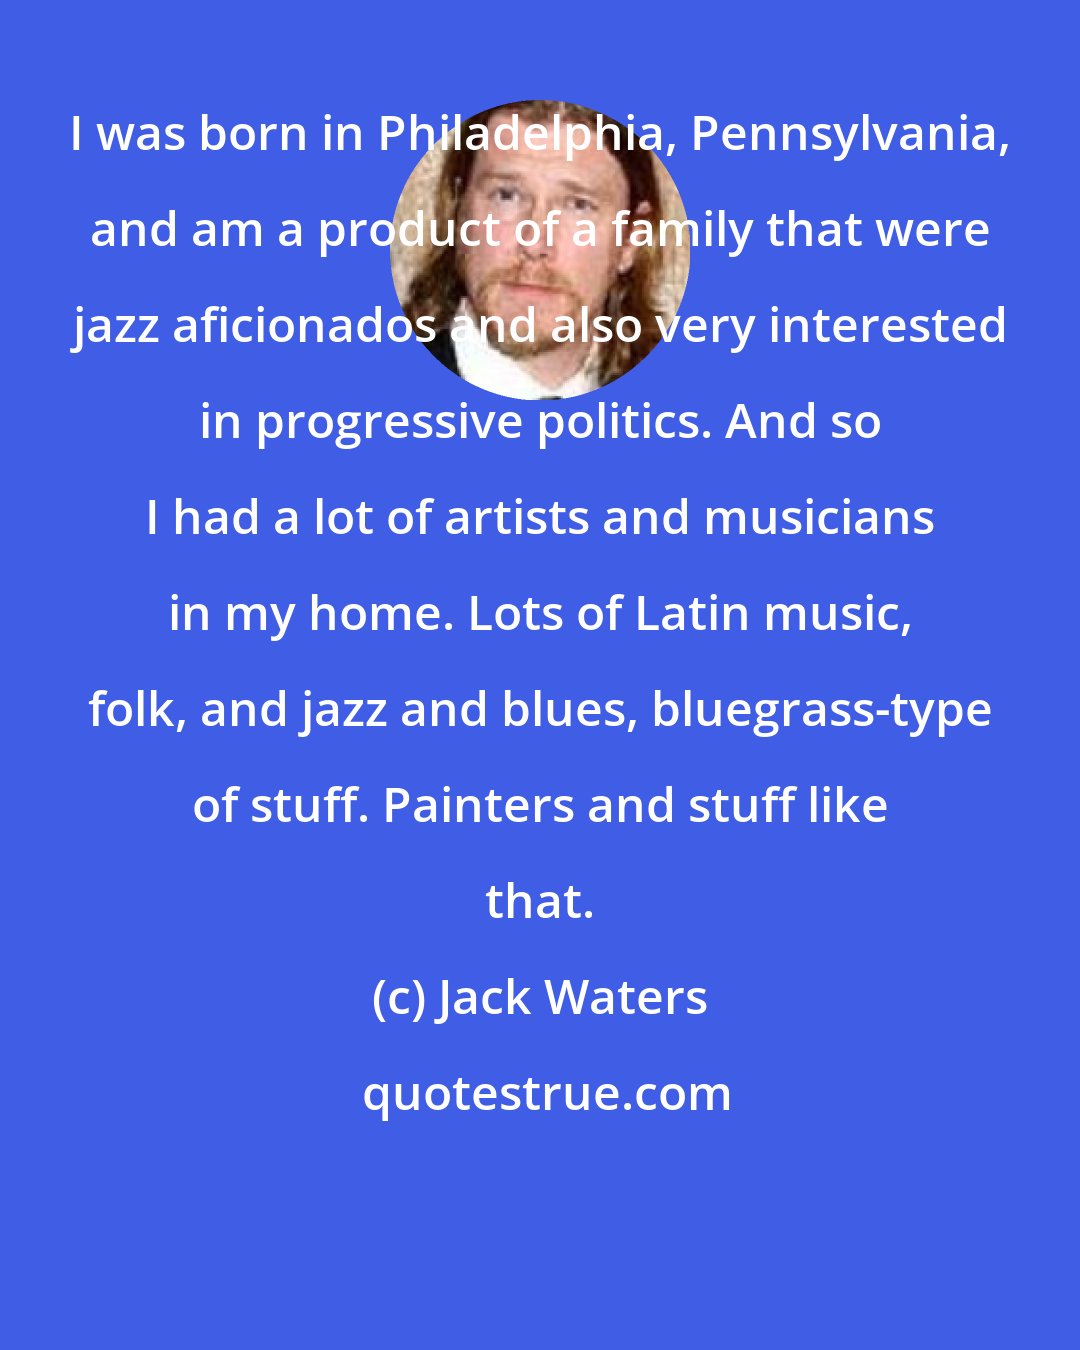 Jack Waters: I was born in Philadelphia, Pennsylvania, and am a product of a family that were jazz aficionados and also very interested in progressive politics. And so I had a lot of artists and musicians in my home. Lots of Latin music, folk, and jazz and blues, bluegrass-type of stuff. Painters and stuff like that.